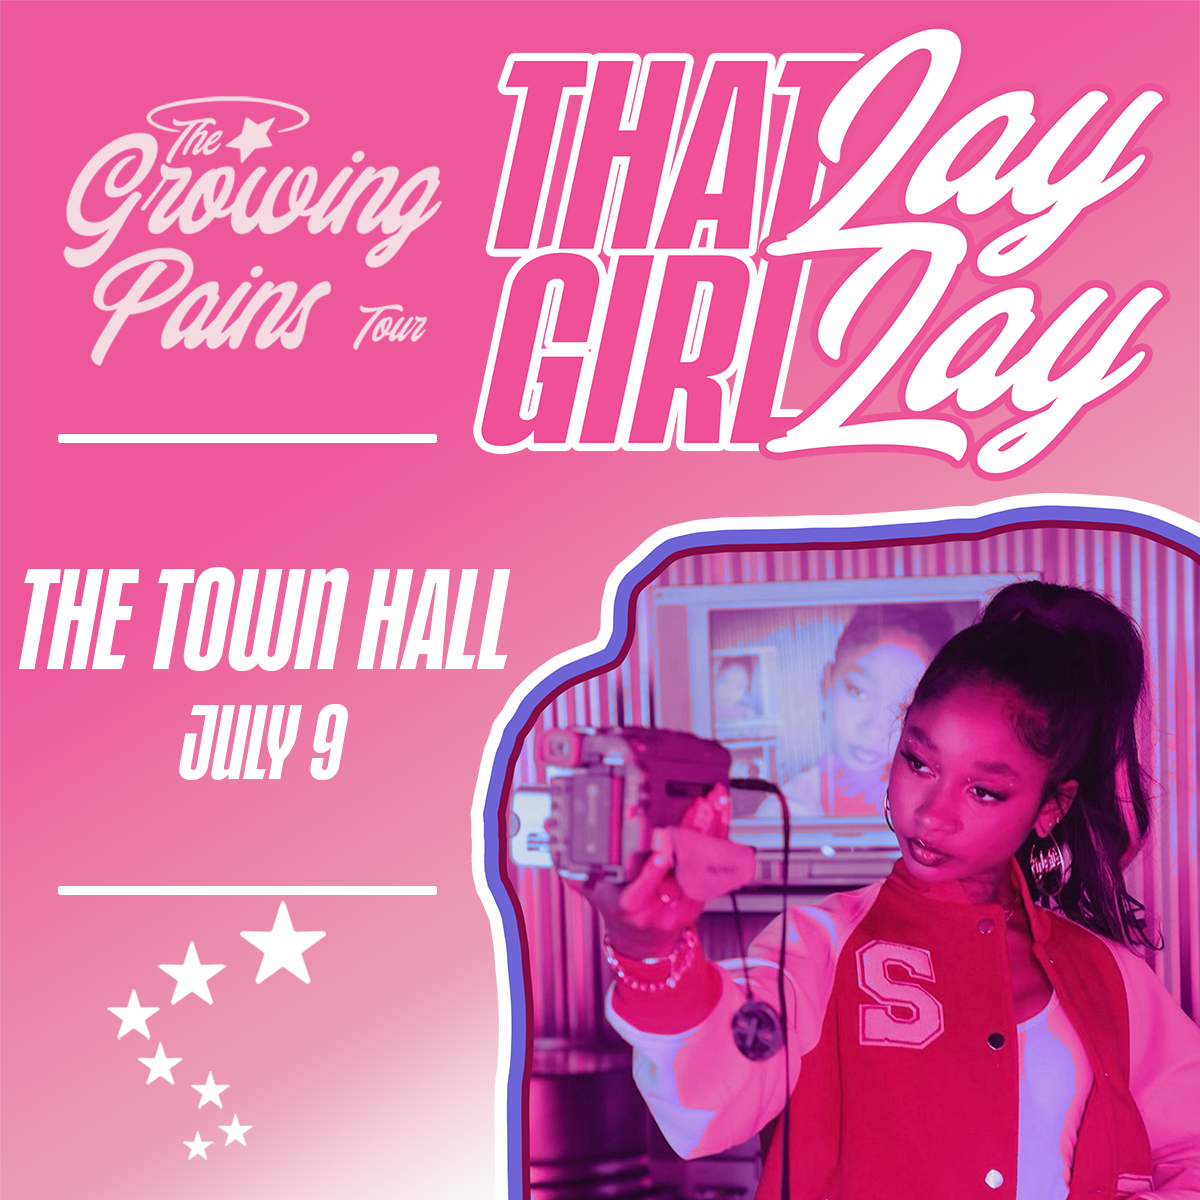 JUST ANNOUNCED: That Girl Lay Lay is coming to The Town Hall on July 9 💫 get your tickets this Friday at 10am!